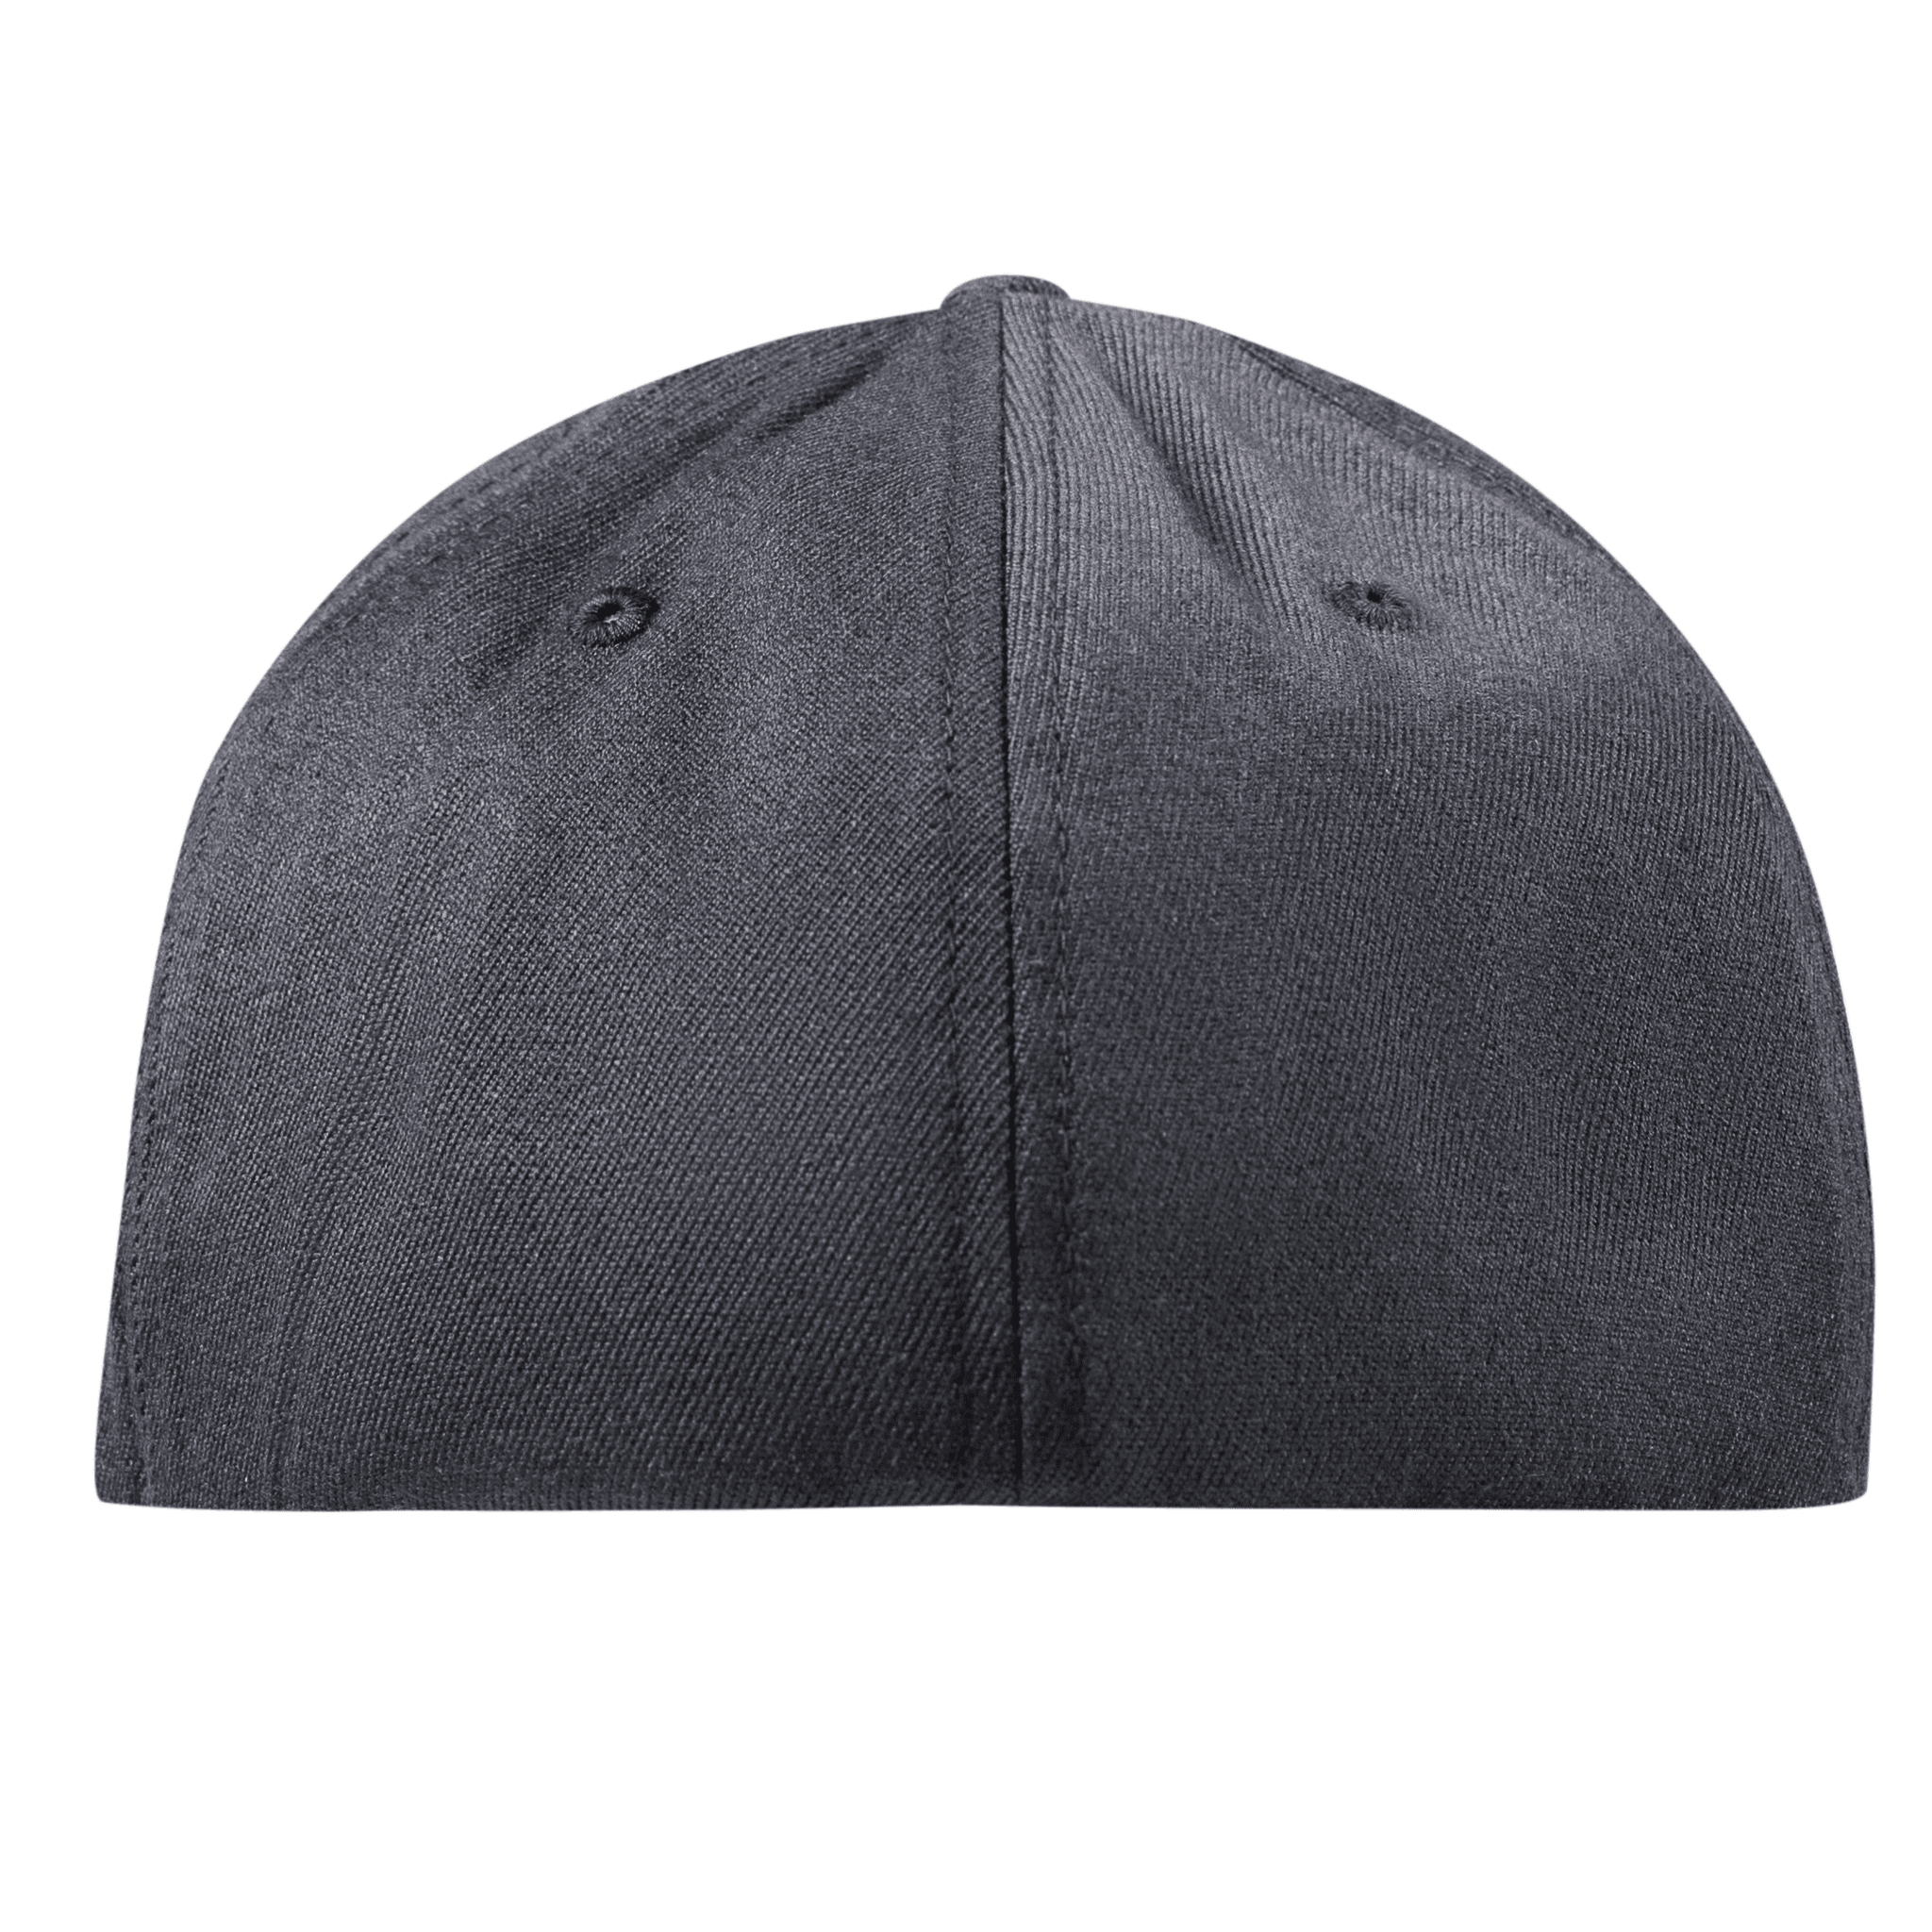 Oklahoma Vintage Flexfit Fitted Back Charcoal